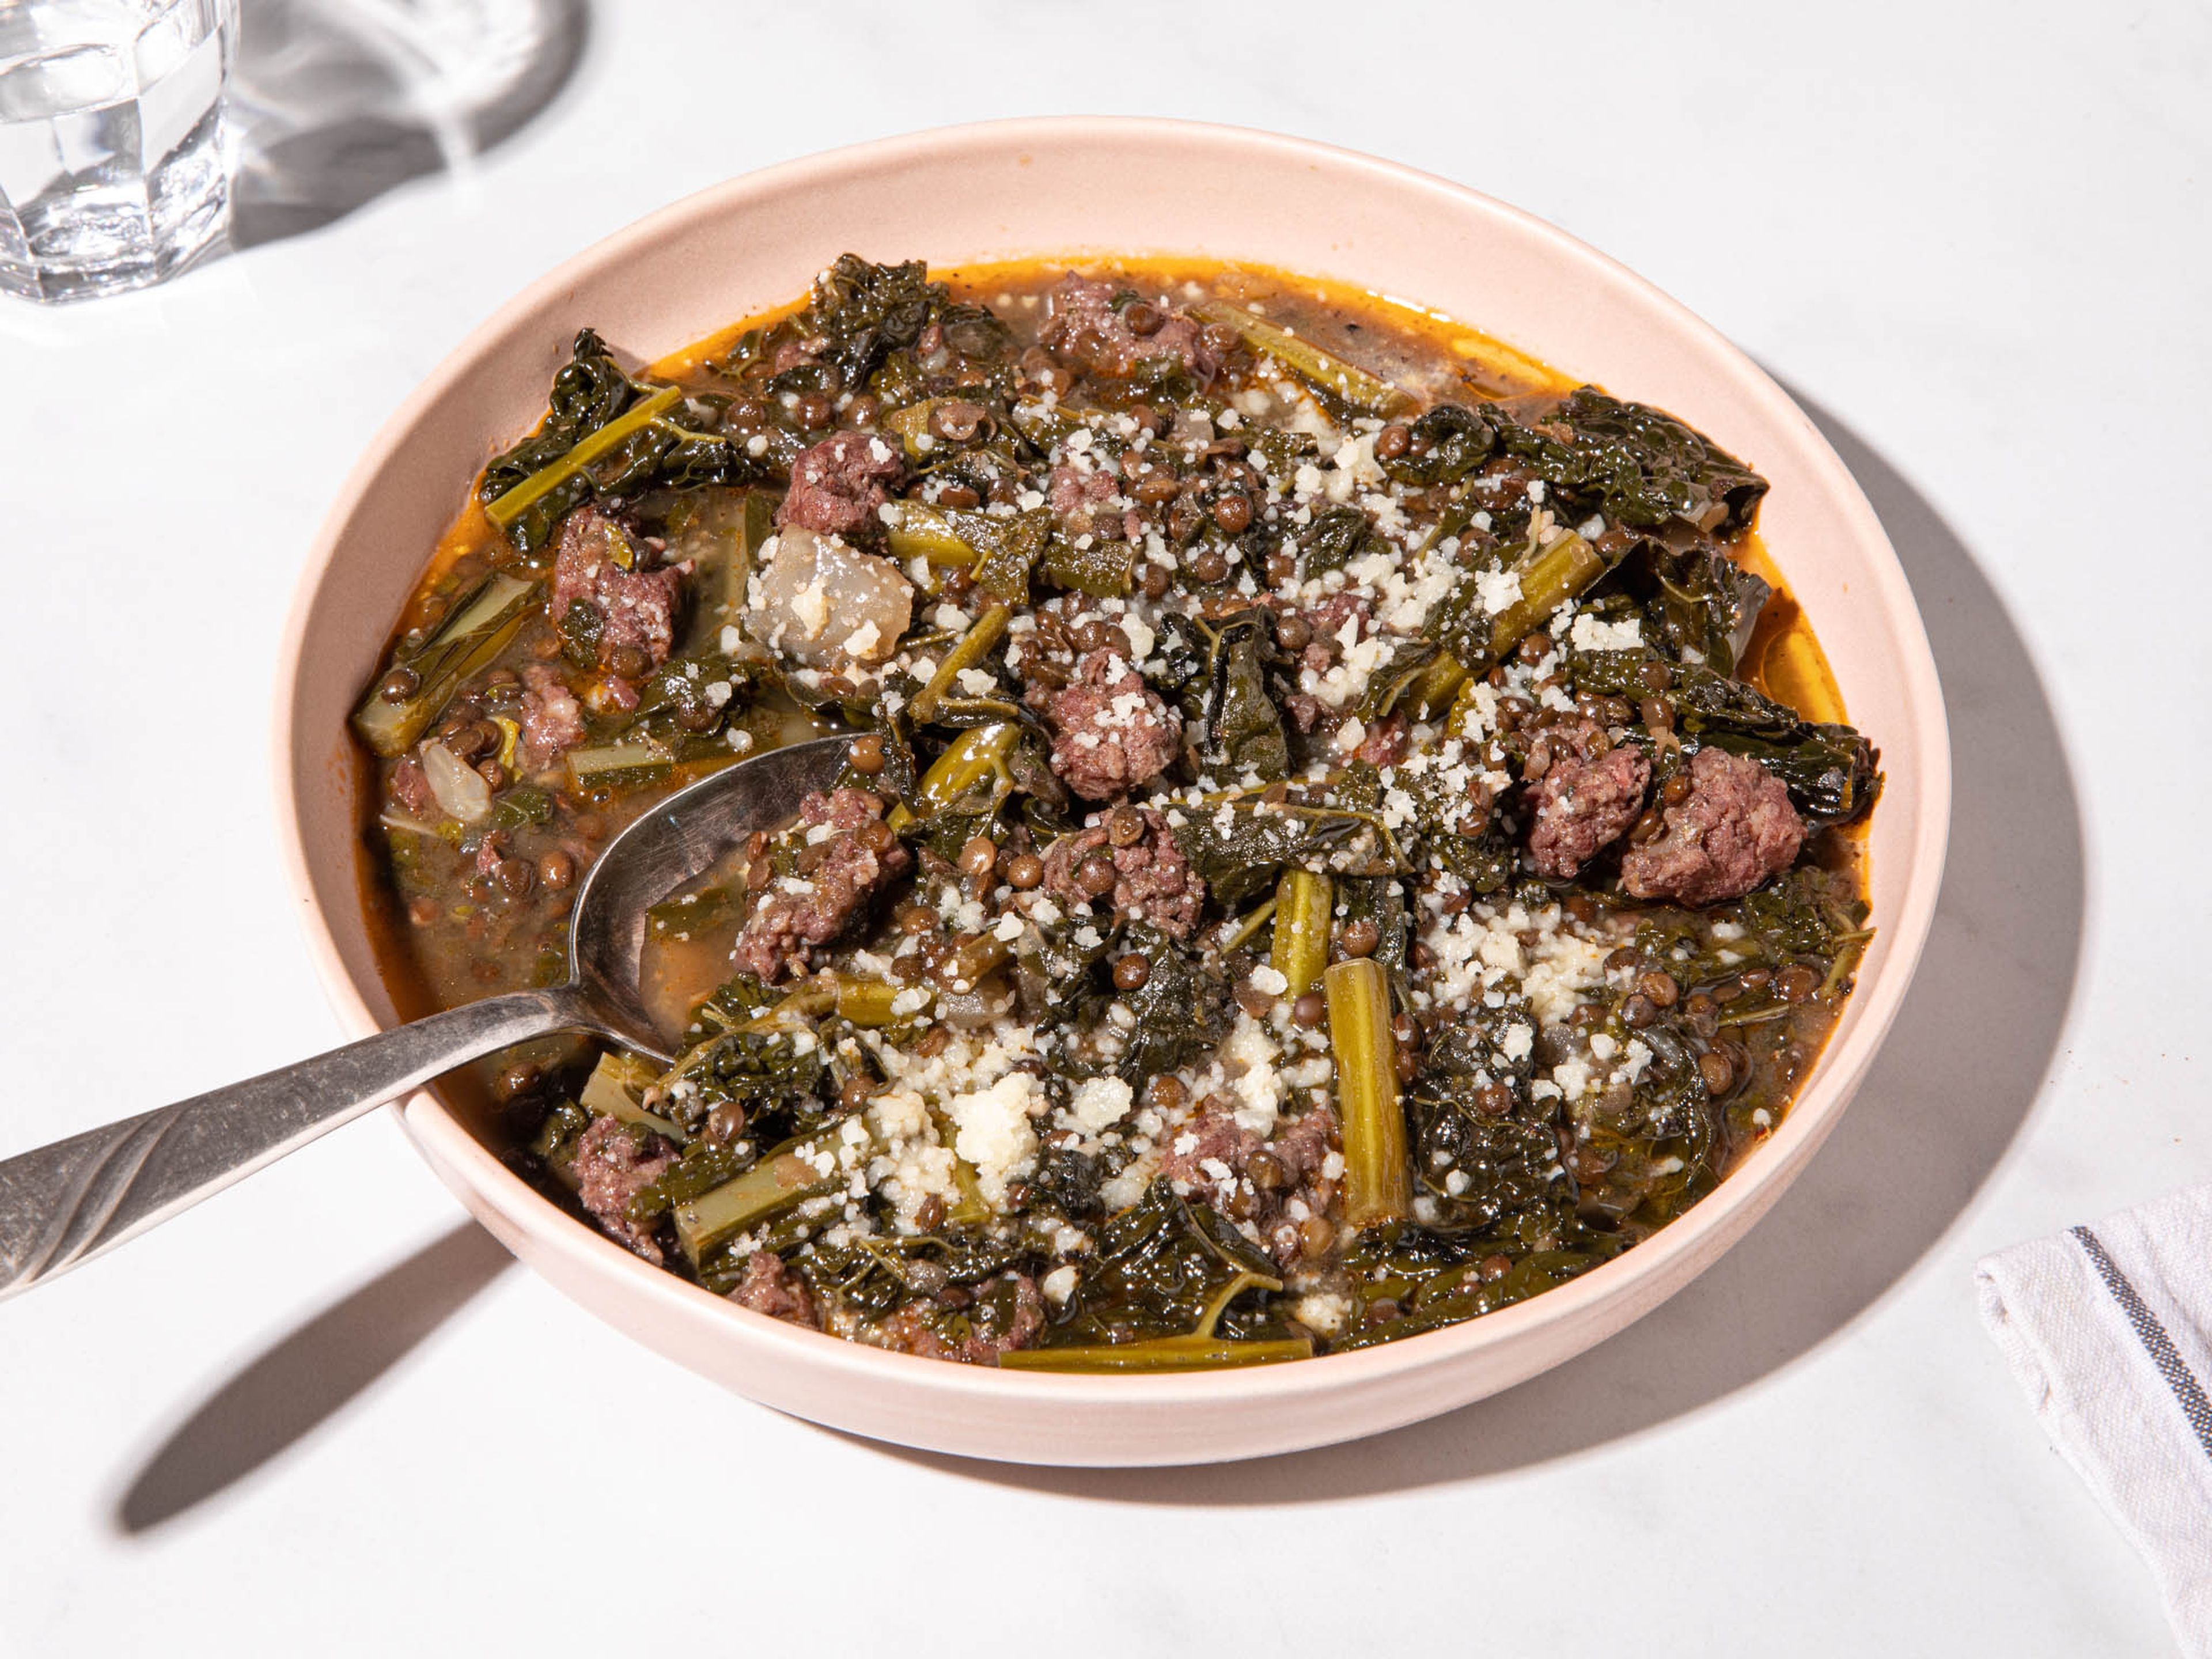 Lentil soup with Italian sausage and kale